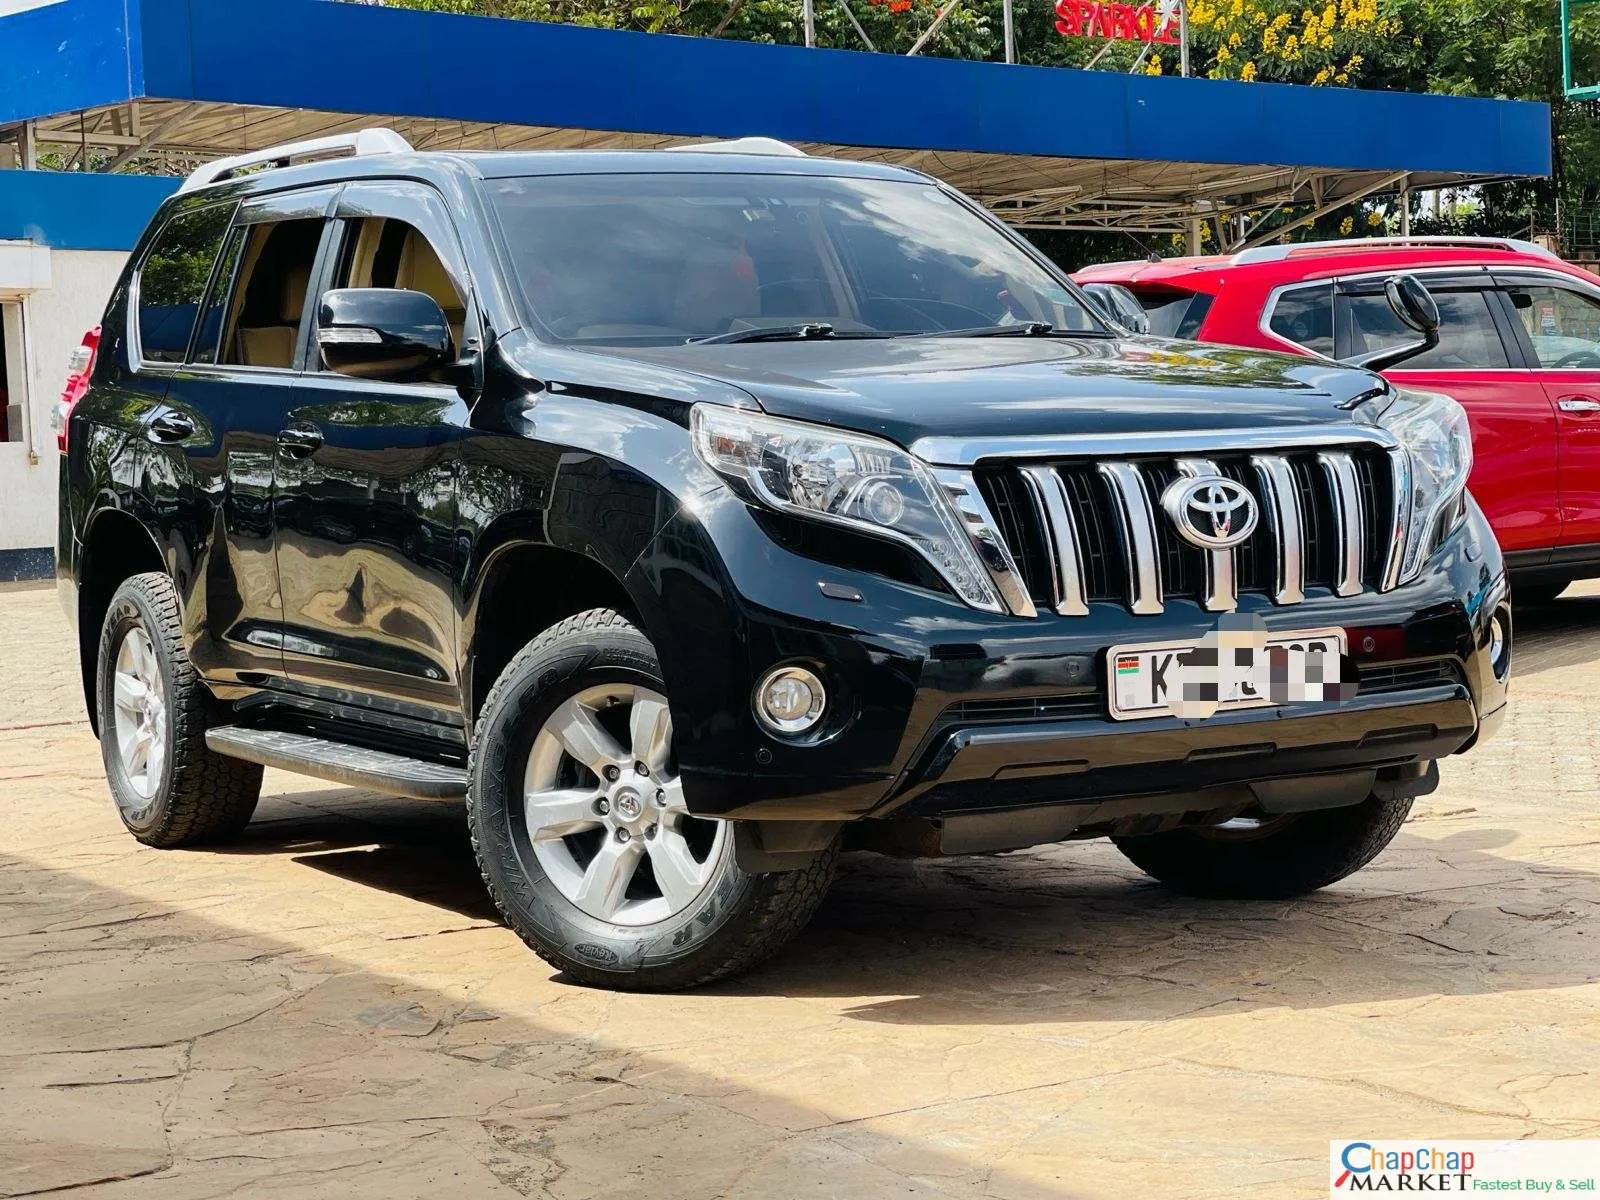 Toyota Prado TZG QUICK SALE 5.2M Fully loaded trade in Ok EXCLUSIVE Hire purchase installments SUNROOF LEATHER